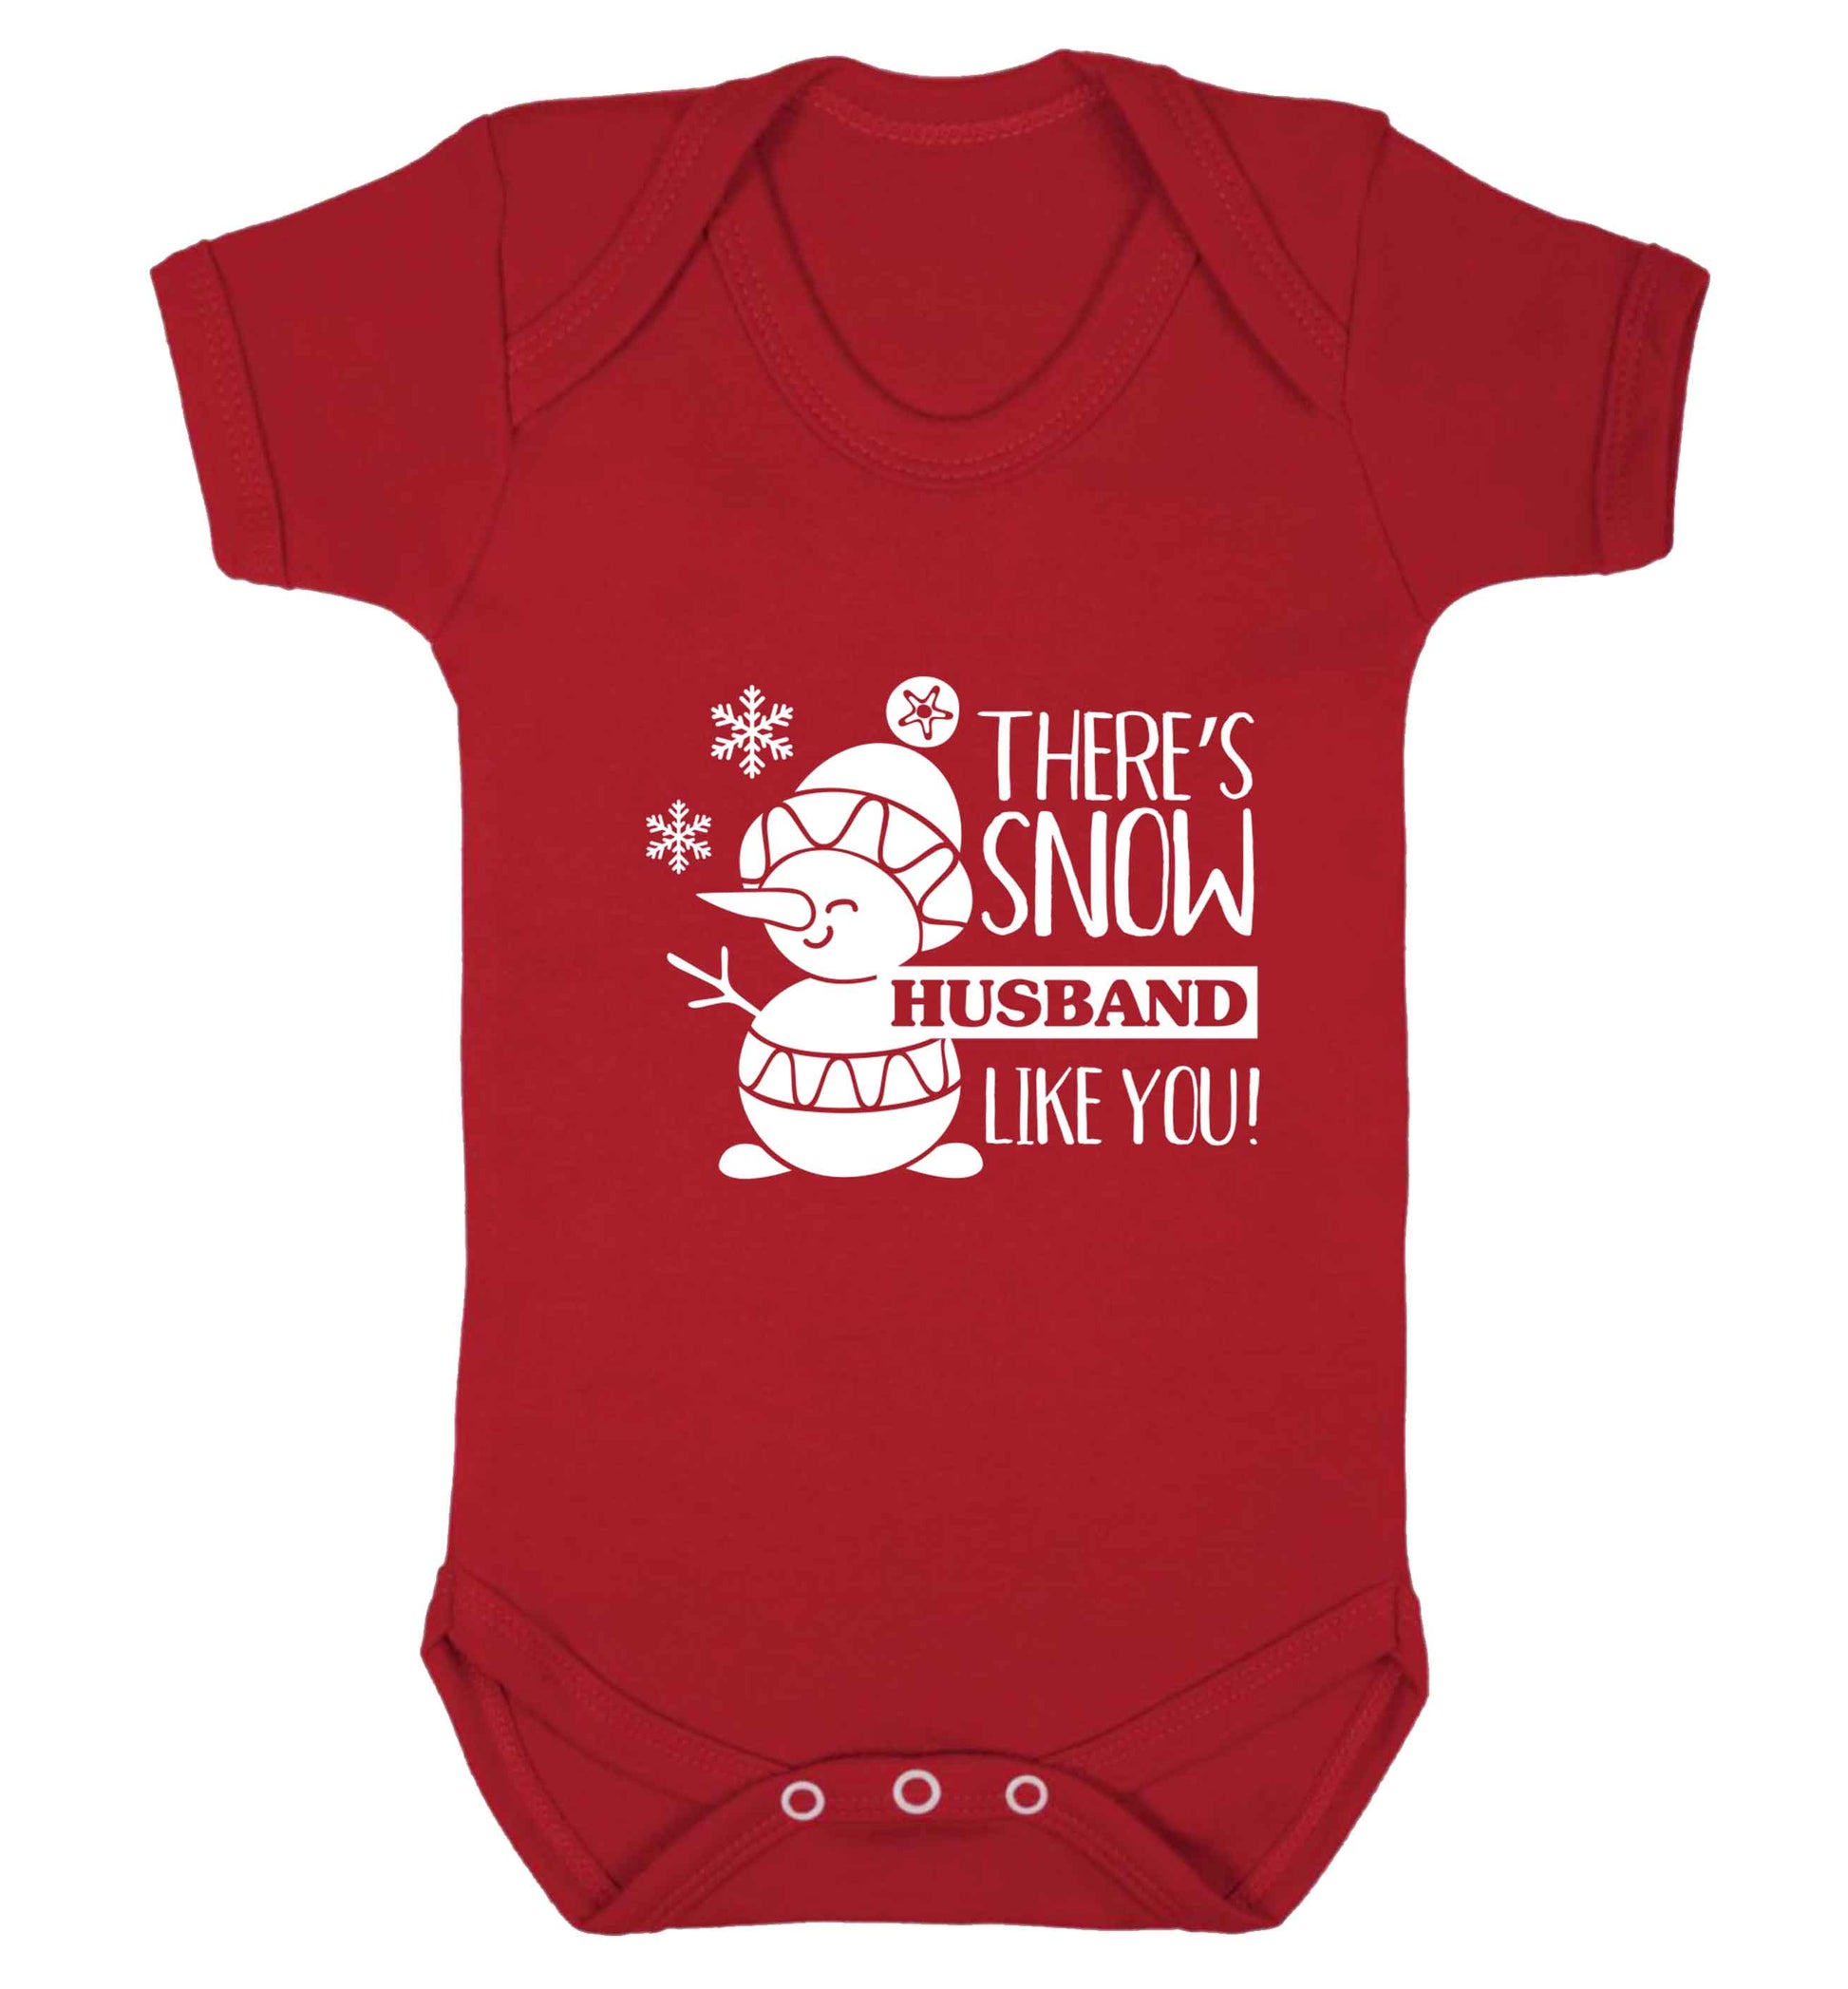 There's snow husband like you baby vest red 18-24 months